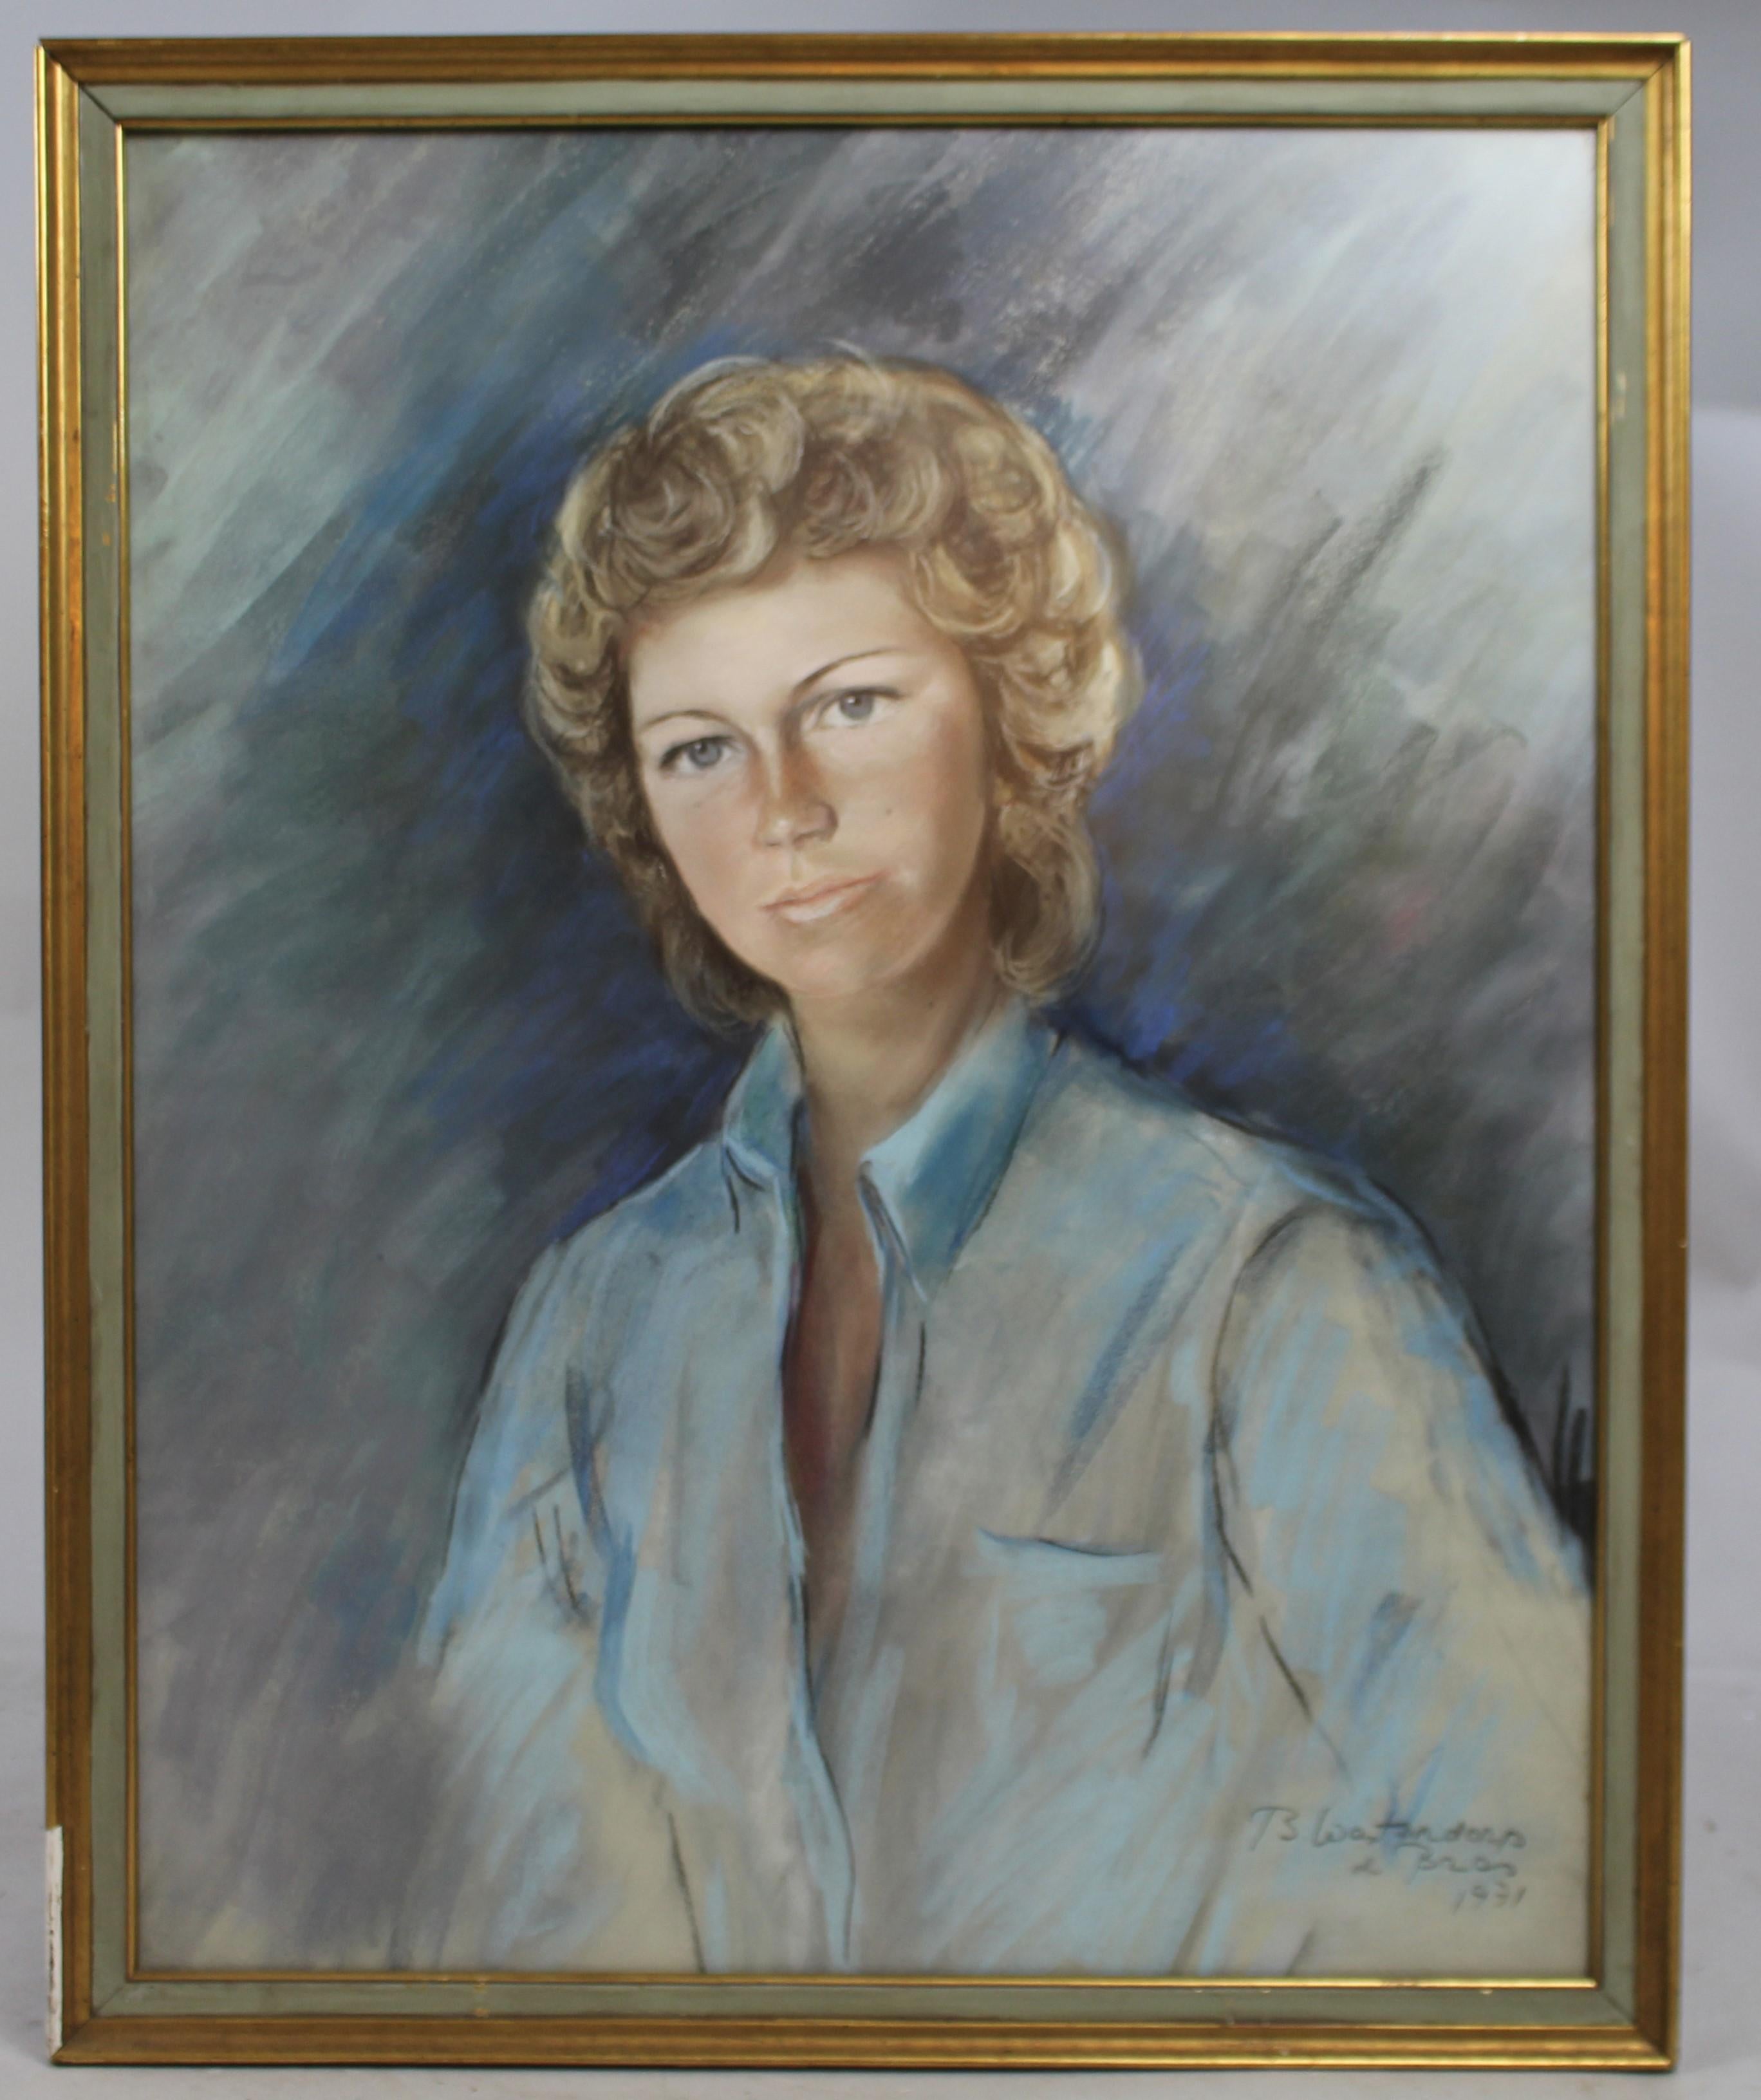 Painting of Ann Bell by Betsy Westendorp (b. 1927) 

Oil on Slate 1971, signed by the artist to the lower right

Frame measures 66 x 81 cm

Ann was nanny to King Juan Carlos' children, Infantas Christina & Elena, and Prince Felipe, now King of